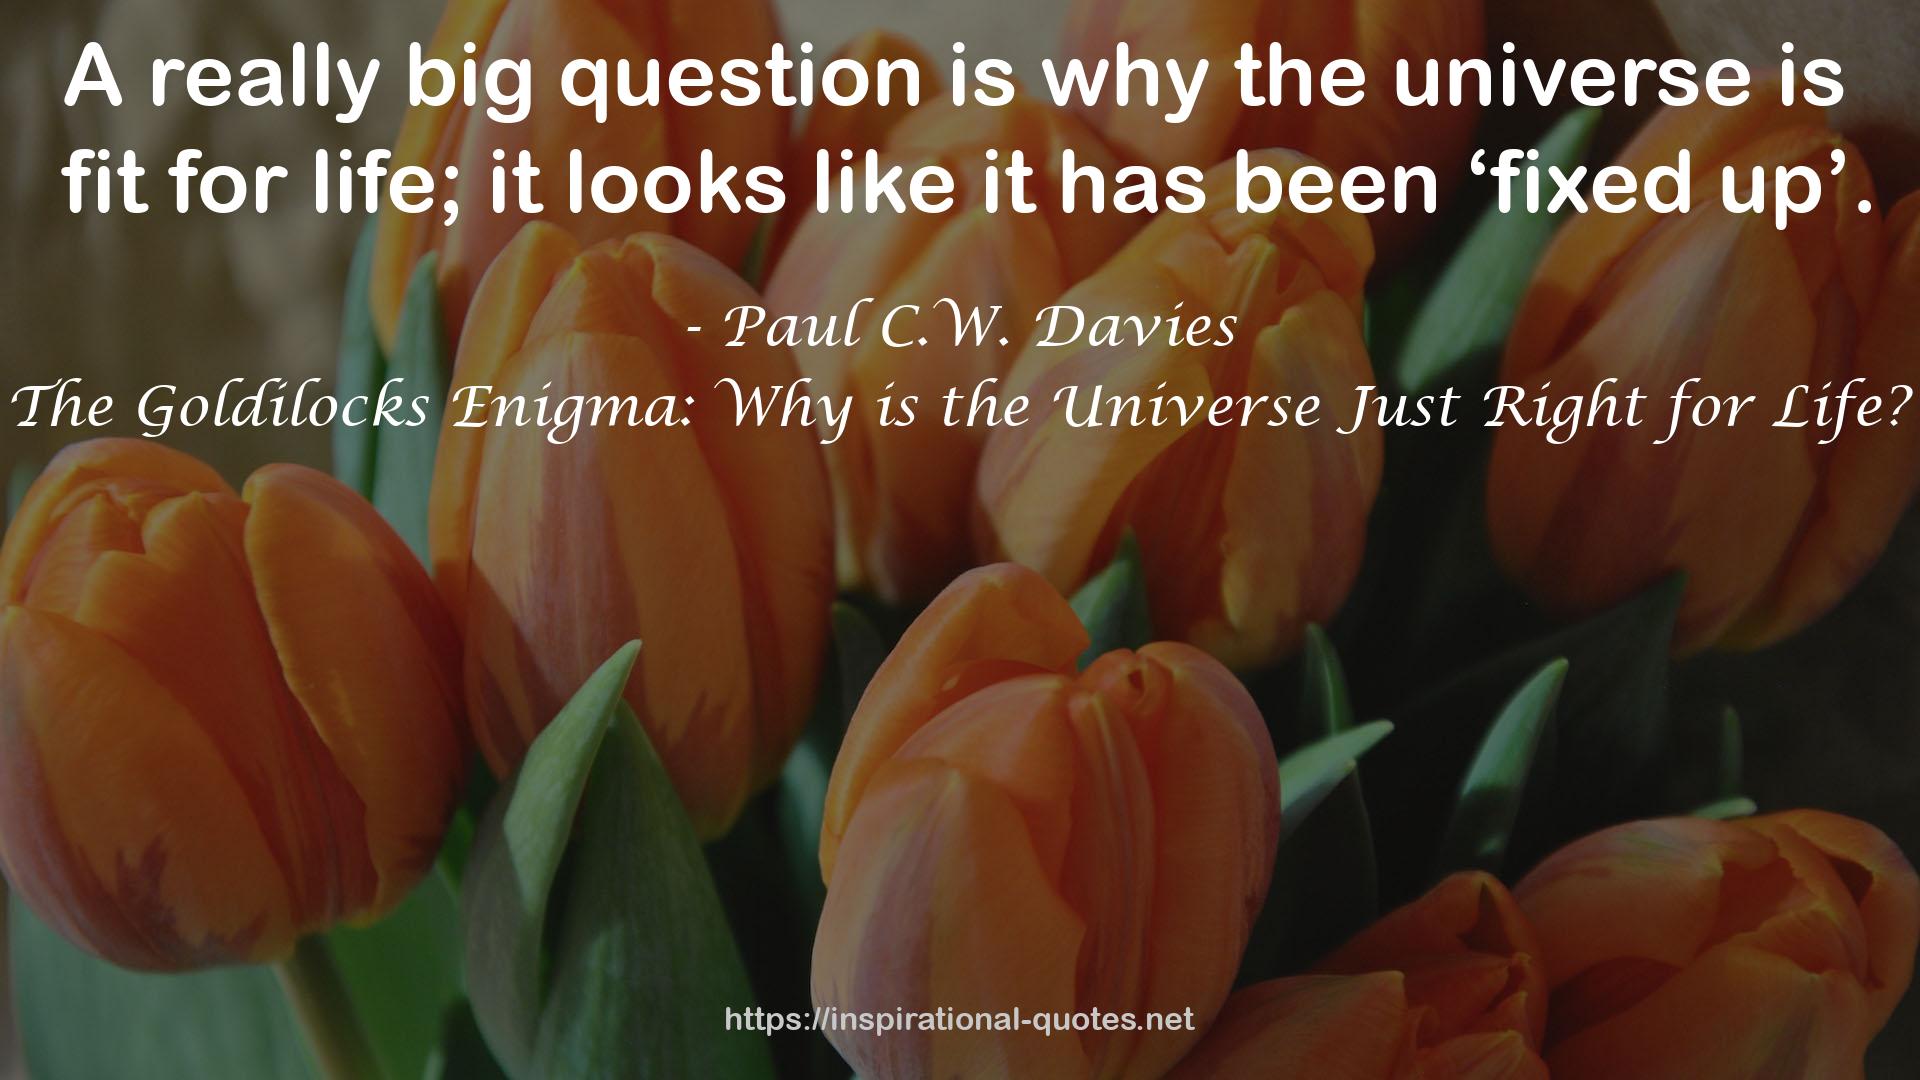 The Goldilocks Enigma: Why is the Universe Just Right for Life? QUOTES